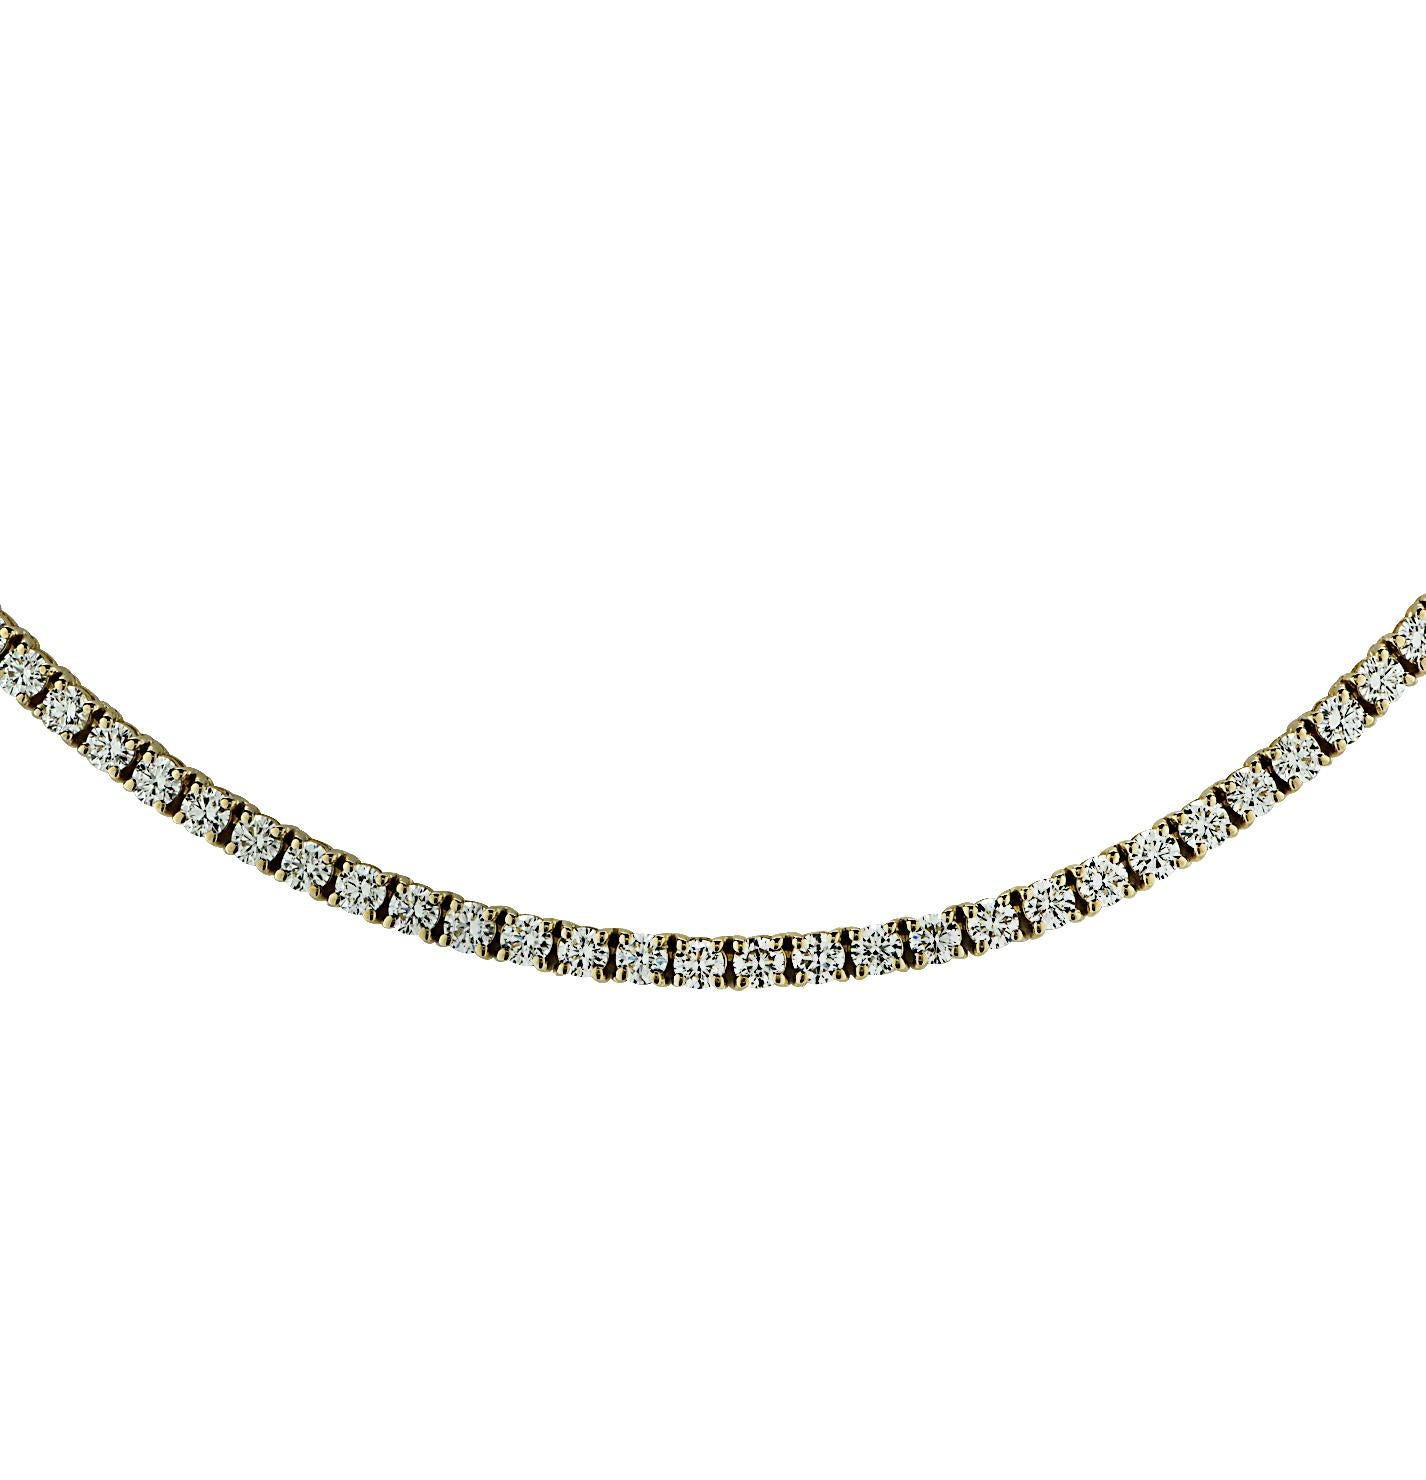 Exquisite Vivid Diamonds Straight Line diamond tennis necklace crafted in Karat Yellow Gold, showcasing 136 round brilliant cut diamonds weighing 10.38 carats total, F-G color, VS Clarity. Each diamond was carefully selected, perfectly matched and